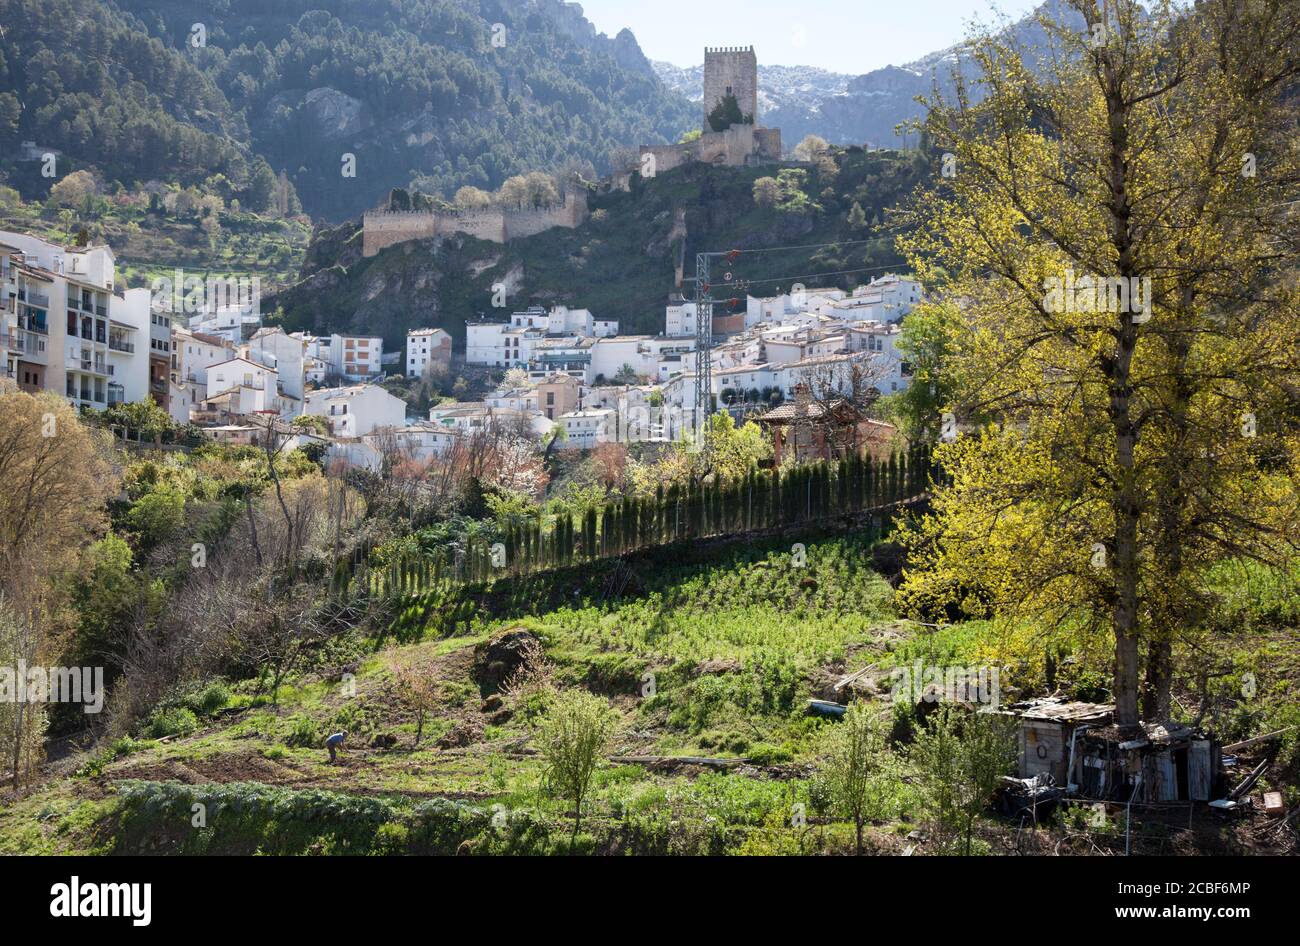 The Castillo de la Yedra overlooks the town of Cazorla in Spain with its whitewashed houses and mountainous backdrop. Stock Photo